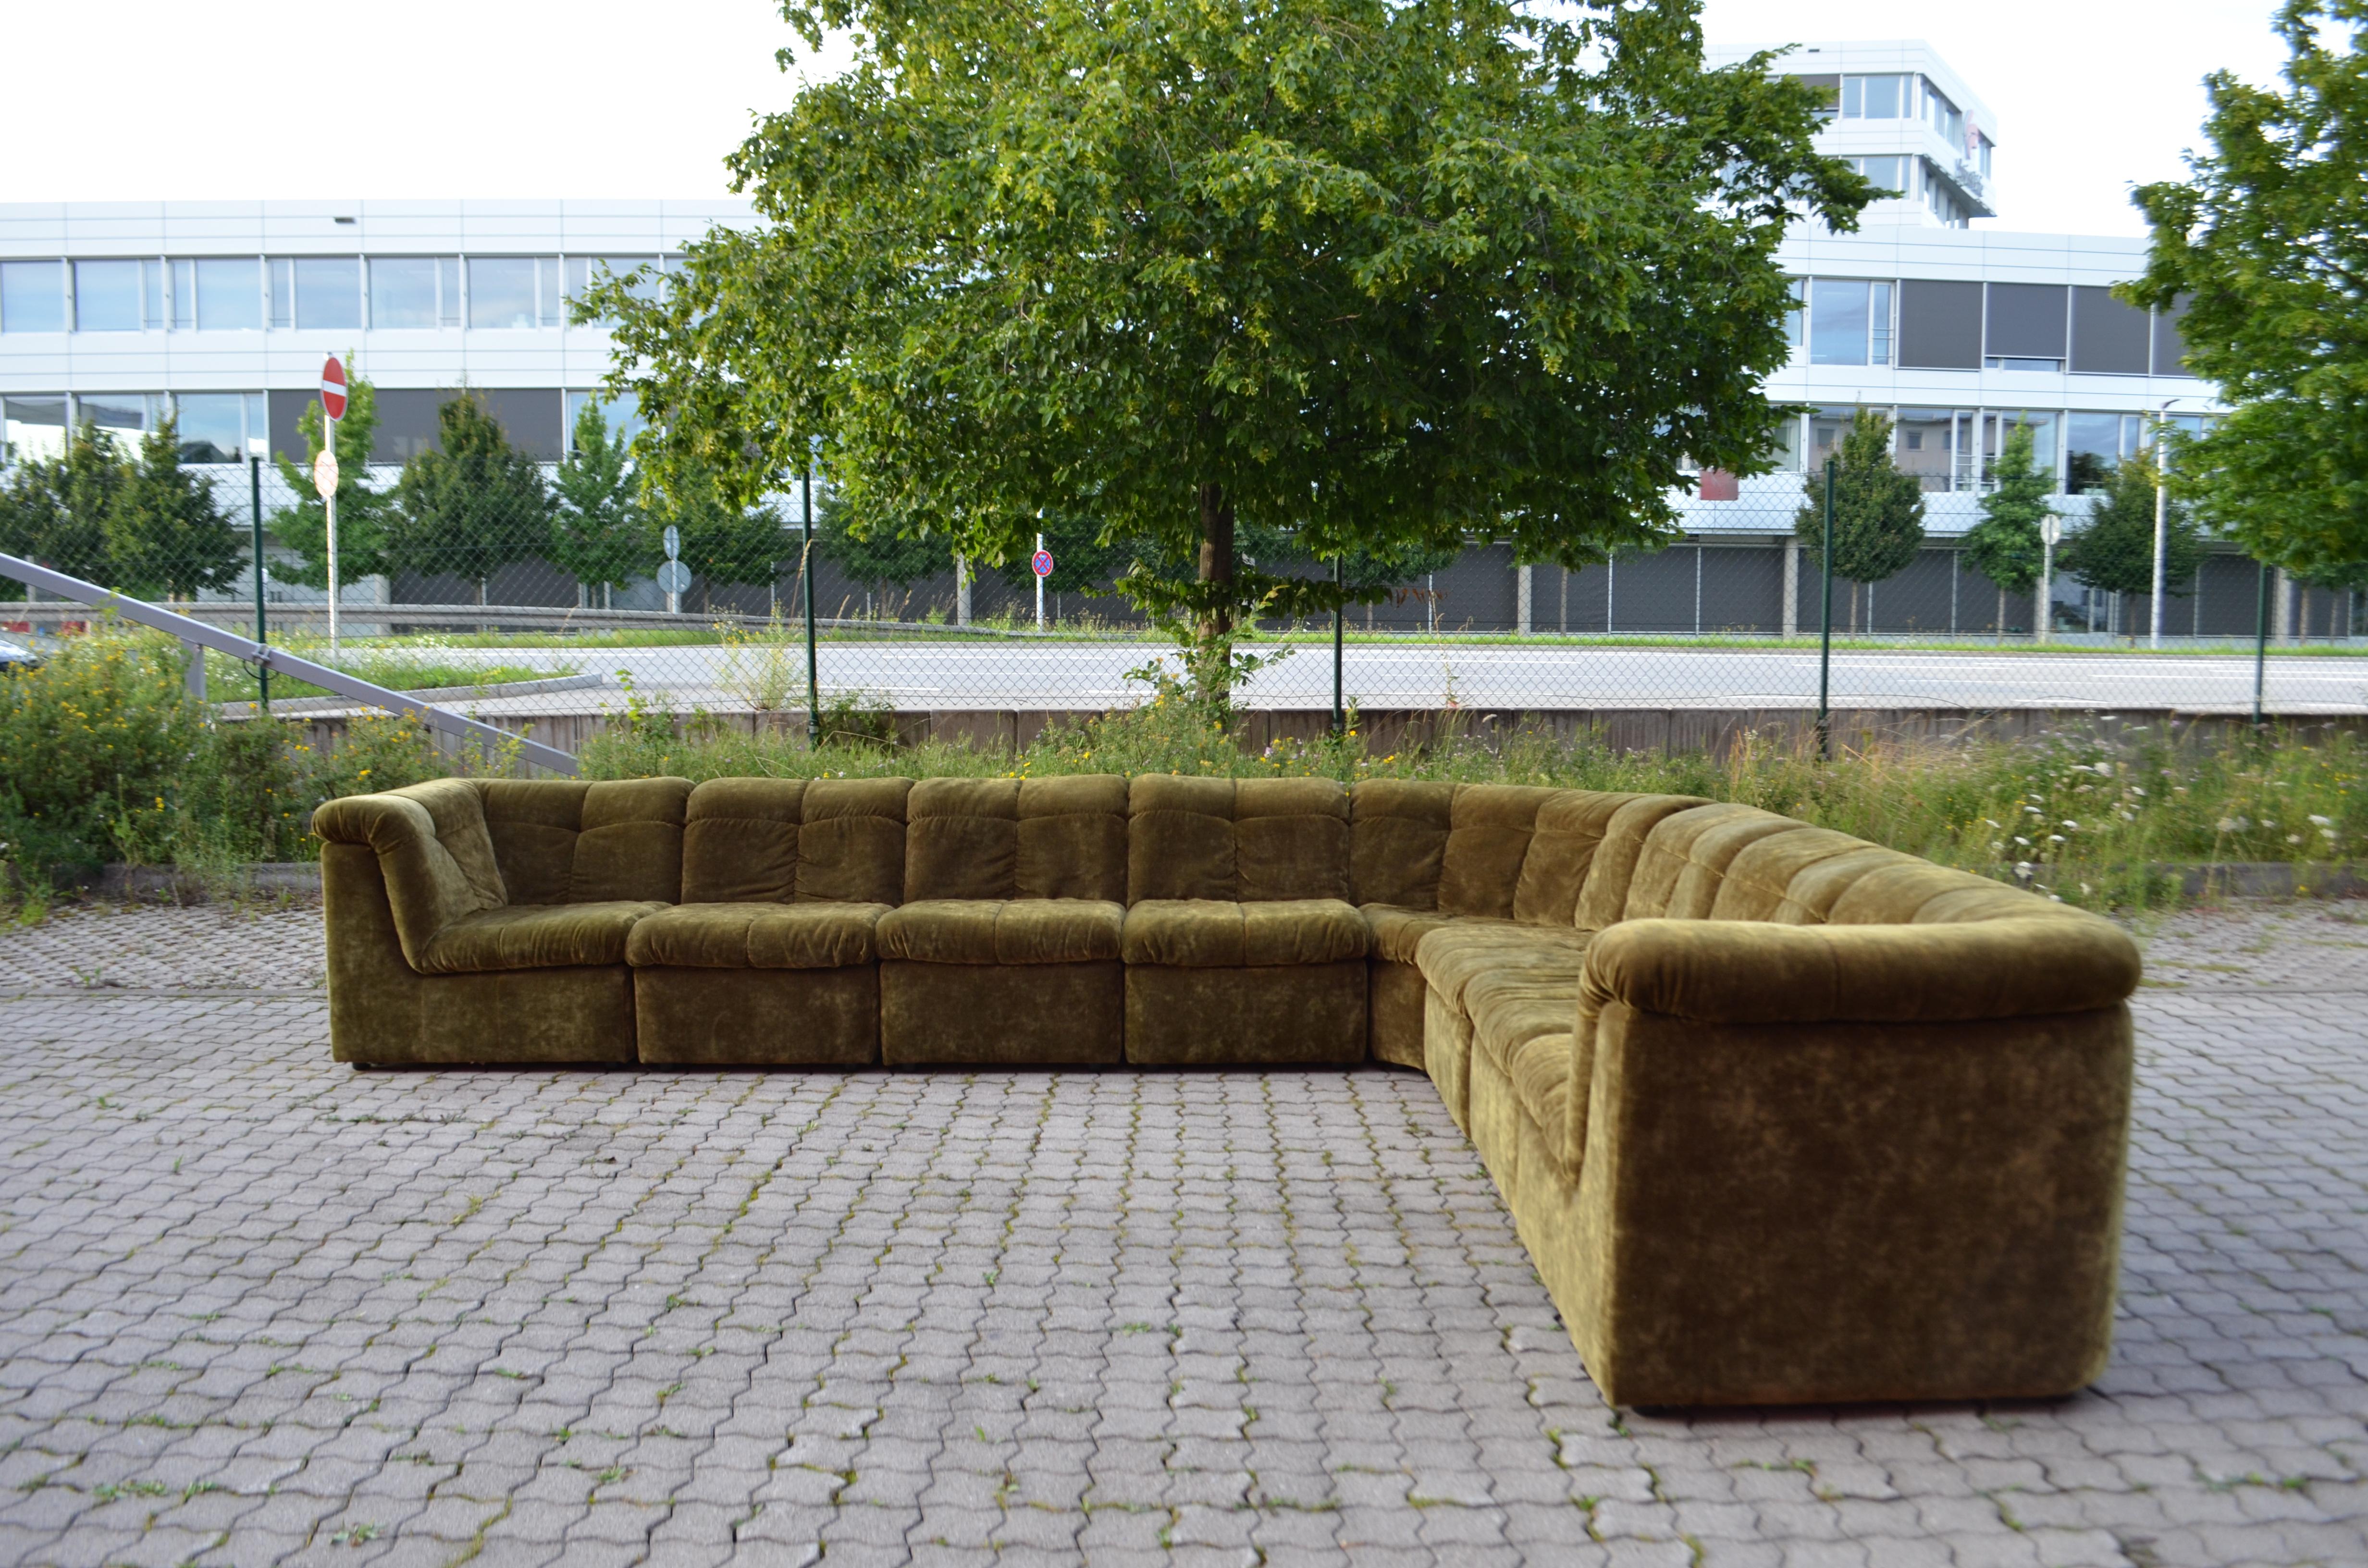 Vintage 1970s modular sofa from Germany.
The fabric is a moss green mohair in very good condition.
Great seating comfort.

It consists 8 elements.
5 Seating elements
2 corner/ end elemnts
1 round element

Each element is made completely of wood,